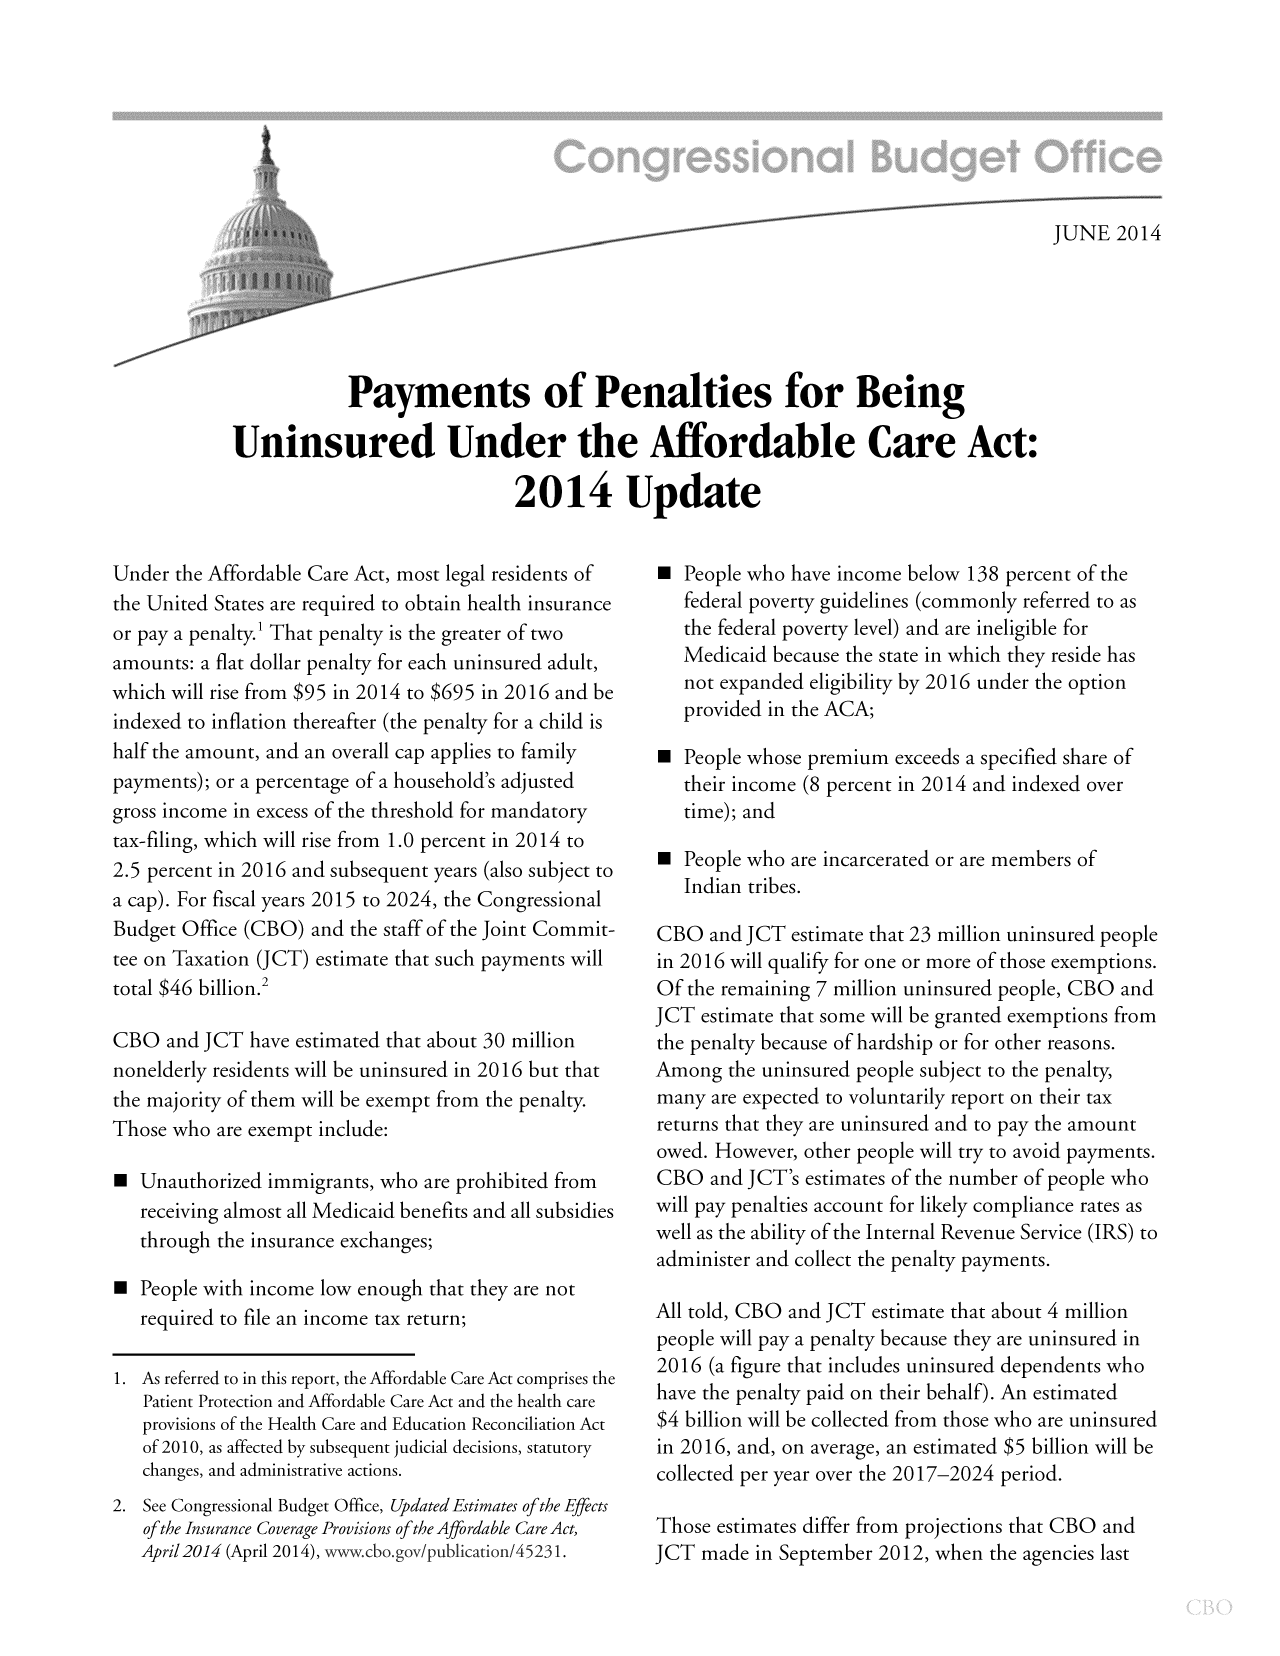 handle is hein.congrec/cbo1656 and id is 1 raw text is: JUNE 2014

Payments of Penalties for Being
Uninsured Under the Affordable Care Act:
2014 Update

Under the Affordable Care Act, most legal residents of
the United States are required to obtain health insurance
or pay a penalty.' That penalty is the greater of two
amounts: a flat dollar penalty for each uninsured adult,
which will rise from $95 in 2014 to $695 in 2016 and be
indexed to inflation thereafter (the penalty for a child is
half the amount, and an overall cap applies to family
payments); or a percentage of a household's adjusted
gross income in excess of the threshold for mandatory
tax-filing, which will rise from 1.0 percent in 2014 to
2.5 percent in 2016 and subsequent years (also subject to
a cap). For fiscal years 2015 to 2024, the Congressional
Budget Office (CBO) and the staff of the Joint Commit-
tee on Taxation (JCT) estimate that such payments will
total $46 billion.2
CBO and JCT have estimated that about 30 million
nonelderly residents will be uninsured in 2016 but that
the majority of them will be exempt from the penalty.
Those who are exempt include:
m Unauthorized immigrants, who are prohibited from
receiving almost all Medicaid benefits and all subsidies
through the insurance exchanges;
m People with income low enough that they are not
required to file an income tax return;
1. As referred to in this report, the Affordable Care Act comprises the
Patient Protection and Affordable Care Act and the health care
provisions of the Health Care and Education Reconciliation Act
of 2010, as affected by subsequent judicial decisions, statutory
changes, and administrative actions.
2. See Congressional Budget Office, Updated Estimates of the Effects
of the Insurance Coverage Provisions of the Affordable Care Act,
April 2014 (April 2014), www.cbo.gov/publication/45231.

m People who have income below 138 percent of the
federal poverty guidelines (commonly referred to as
the federal poverty level) and are ineligible for
Medicaid because the state in which they reside has
not expanded eligibility by 2016 under the option
provided in the ACA;
m People whose premium exceeds a specified share of
their income (8 percent in 2014 and indexed over
time); and
m People who are incarcerated or are members of
Indian tribes.
CBO and JCT estimate that 23 million uninsured people
in 2016 will qualify for one or more of those exemptions.
Of the remaining 7 million uninsured people, CBO and
JCT estimate that some will be granted exemptions from
the penalty because of hardship or for other reasons.
Among the uninsured people subject to the penalty,
many are expected to voluntarily report on their tax
returns that they are uninsured and to pay the amount
owed. However, other people will try to avoid payments.
CBO and JCT's estimates of the number of people who
will pay penalties account for likely compliance rates as
well as the ability of the Internal Revenue Service (IRS) to
administer and collect the penalty payments.
All told, CBO and JCT estimate that about 4 million
people will pay a penalty because they are uninsured in
2016 (a figure that includes uninsured dependents who
have the penalty paid on their behalf). An estimated
$4 billion will be collected from those who are uninsured
in 2016, and, on average, an estimated $5 billion will be
collected per year over the 2017-2024 period.
Those estimates differ from projections that CBO and
JCT made in September 2012, when the agencies last


